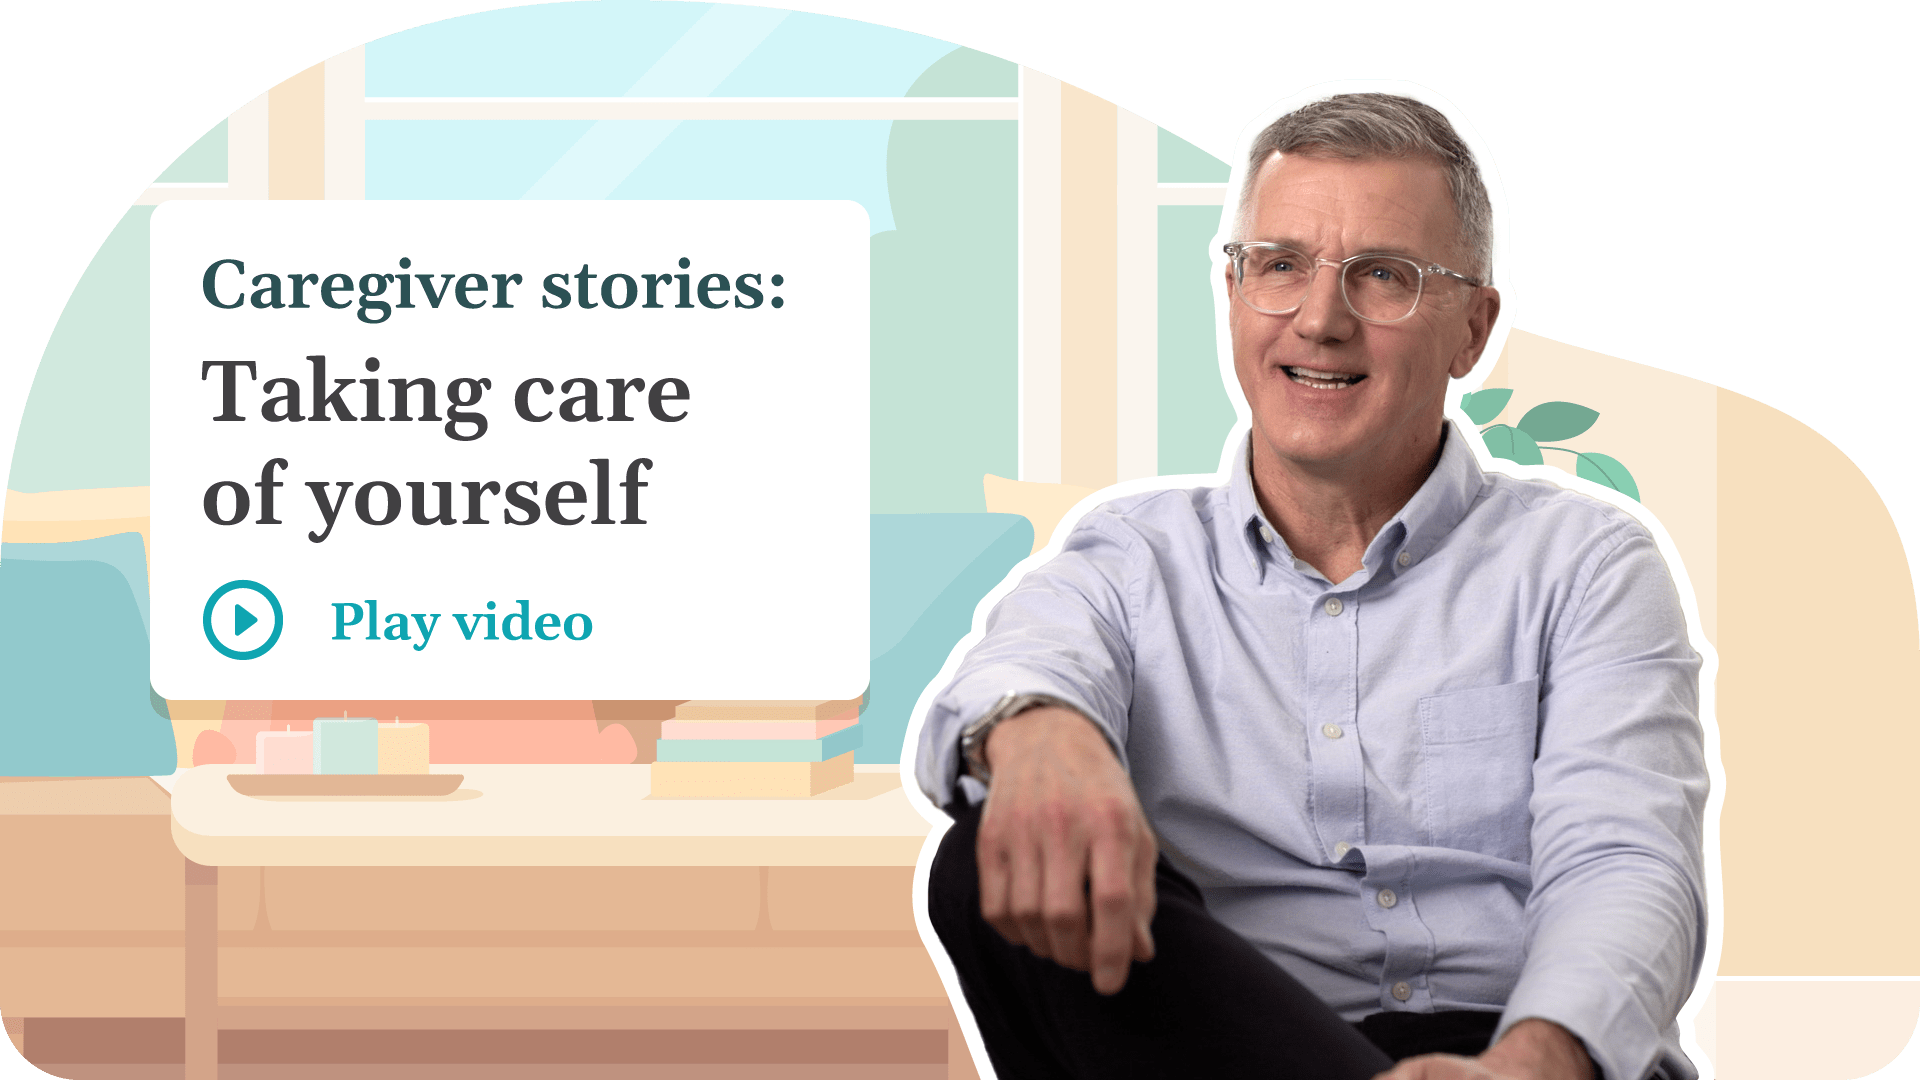 [Tap to play] Thumbnail for a video titled: Caregiver stories: Taking care of yourself. 